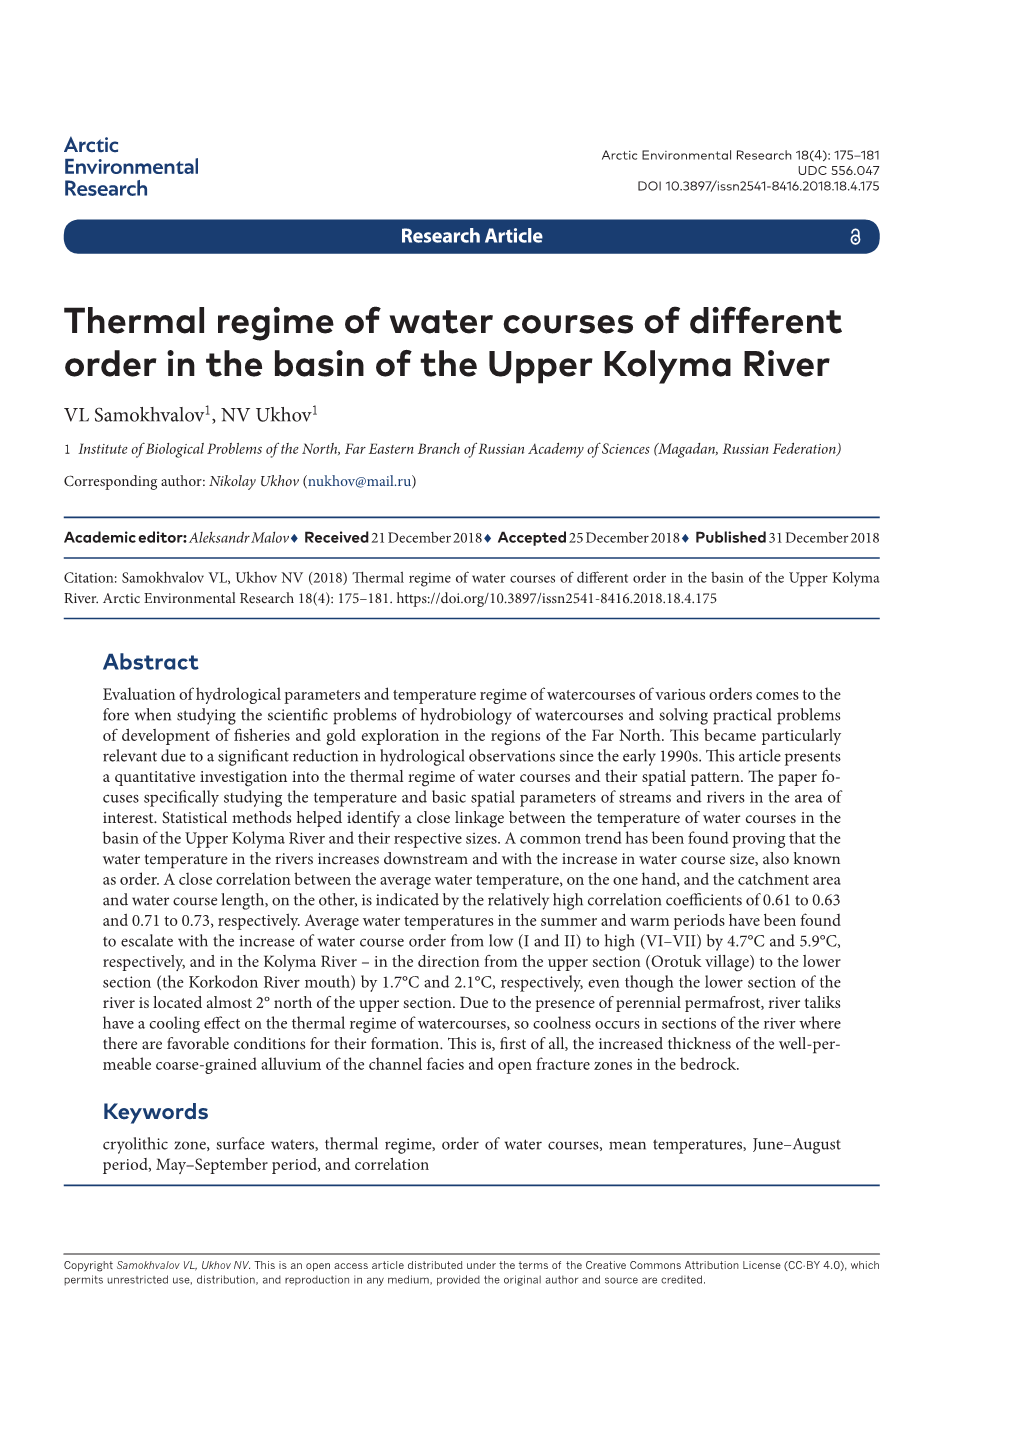 ﻿Thermal Regime of Water Courses of Different Order in the Basin of The